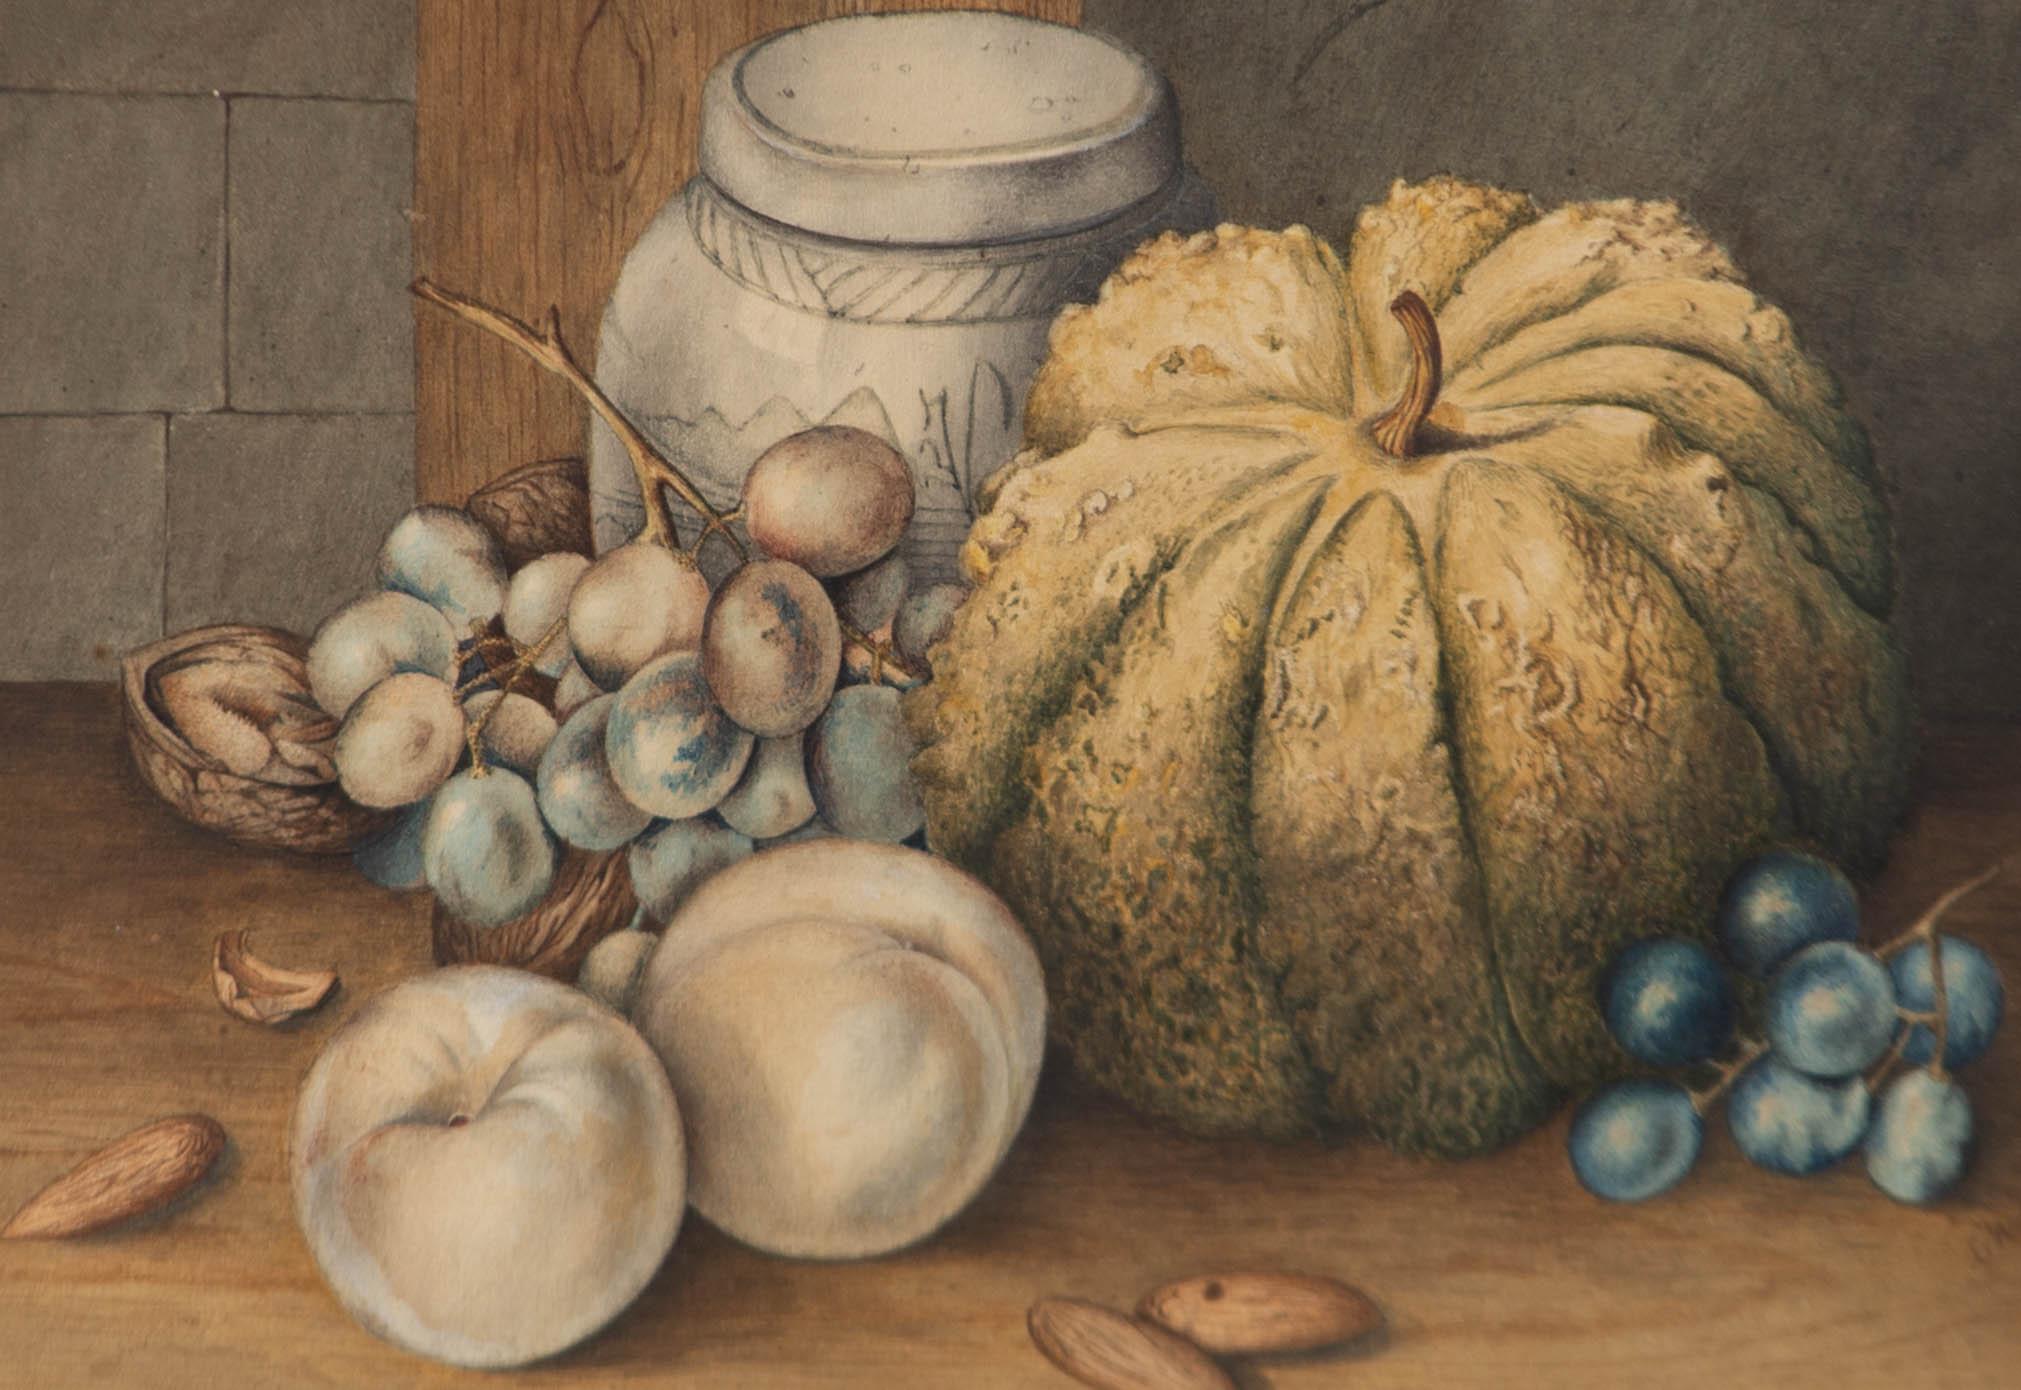 A fine and detailed watercolour painting, depicting a still life composition with several fruits, nuts, a pumpkin and a white jar. Monogrammed to the lower right-hand corner. Well-presented in a double card mount and in an ornate gilt effect frame.